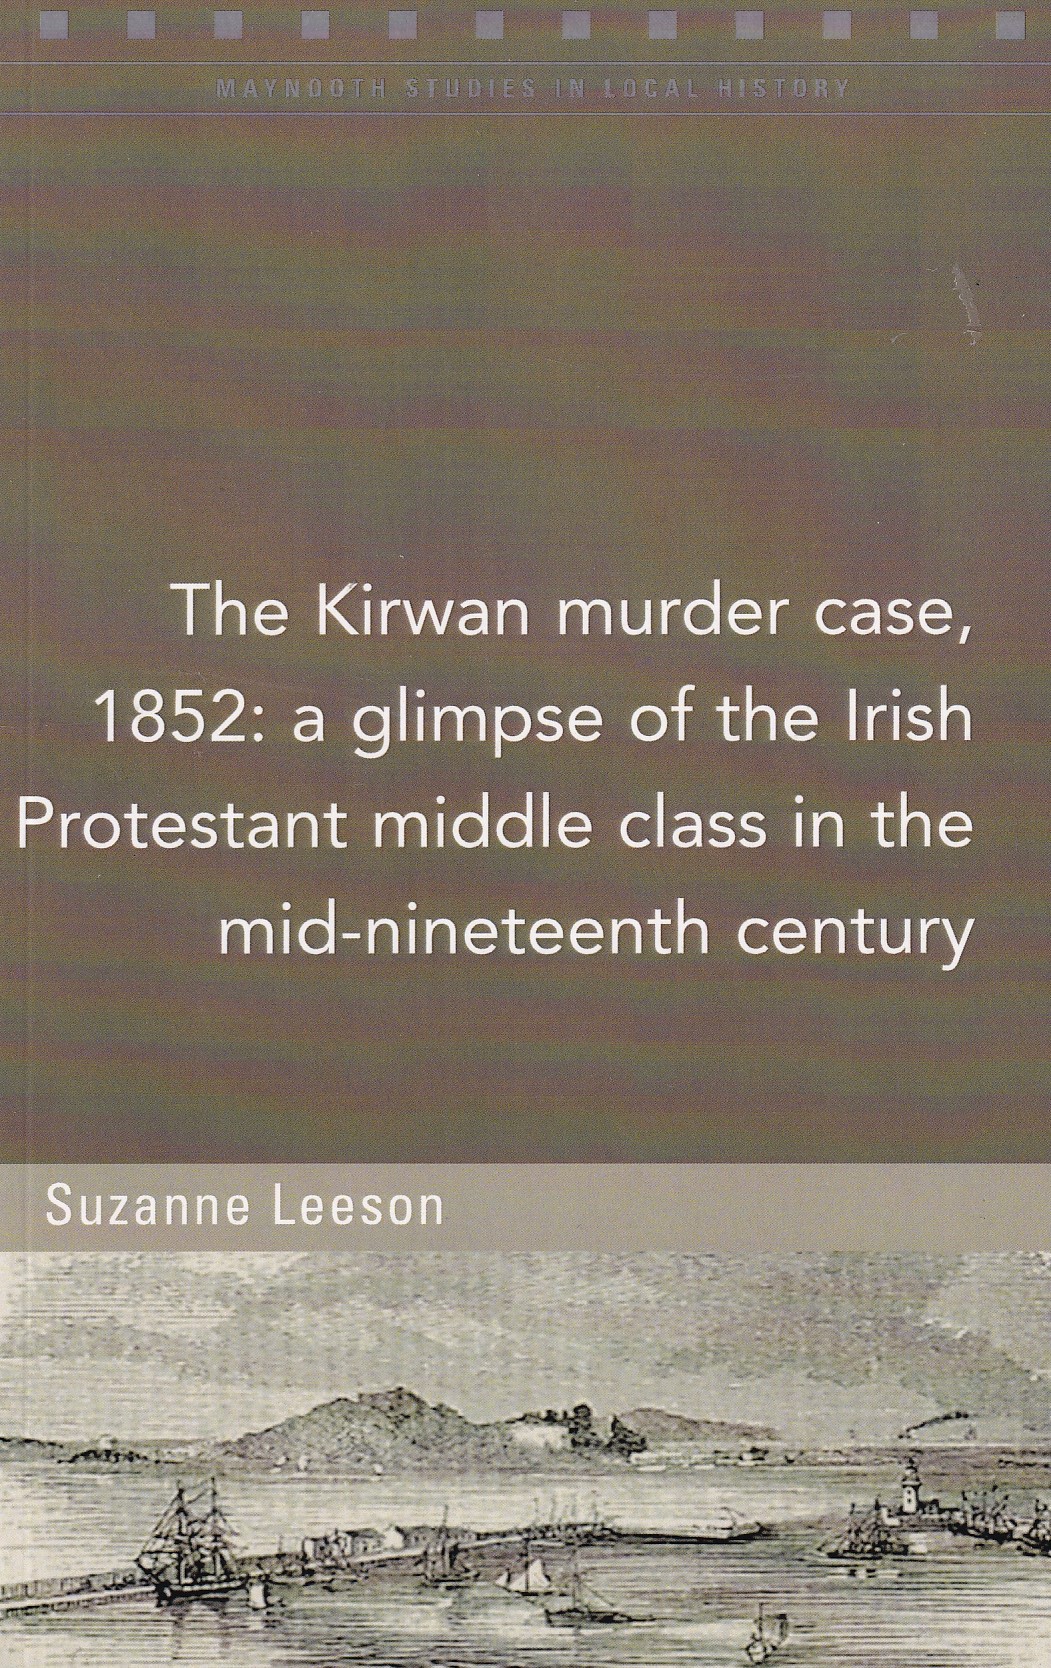 The Kirwan murder case, 1852: A glimpse of the Irish Protestant middle class in the mid-nineteenth century (Maynooth Studies in Local History) | Suzanne Leeson | Charlie Byrne's